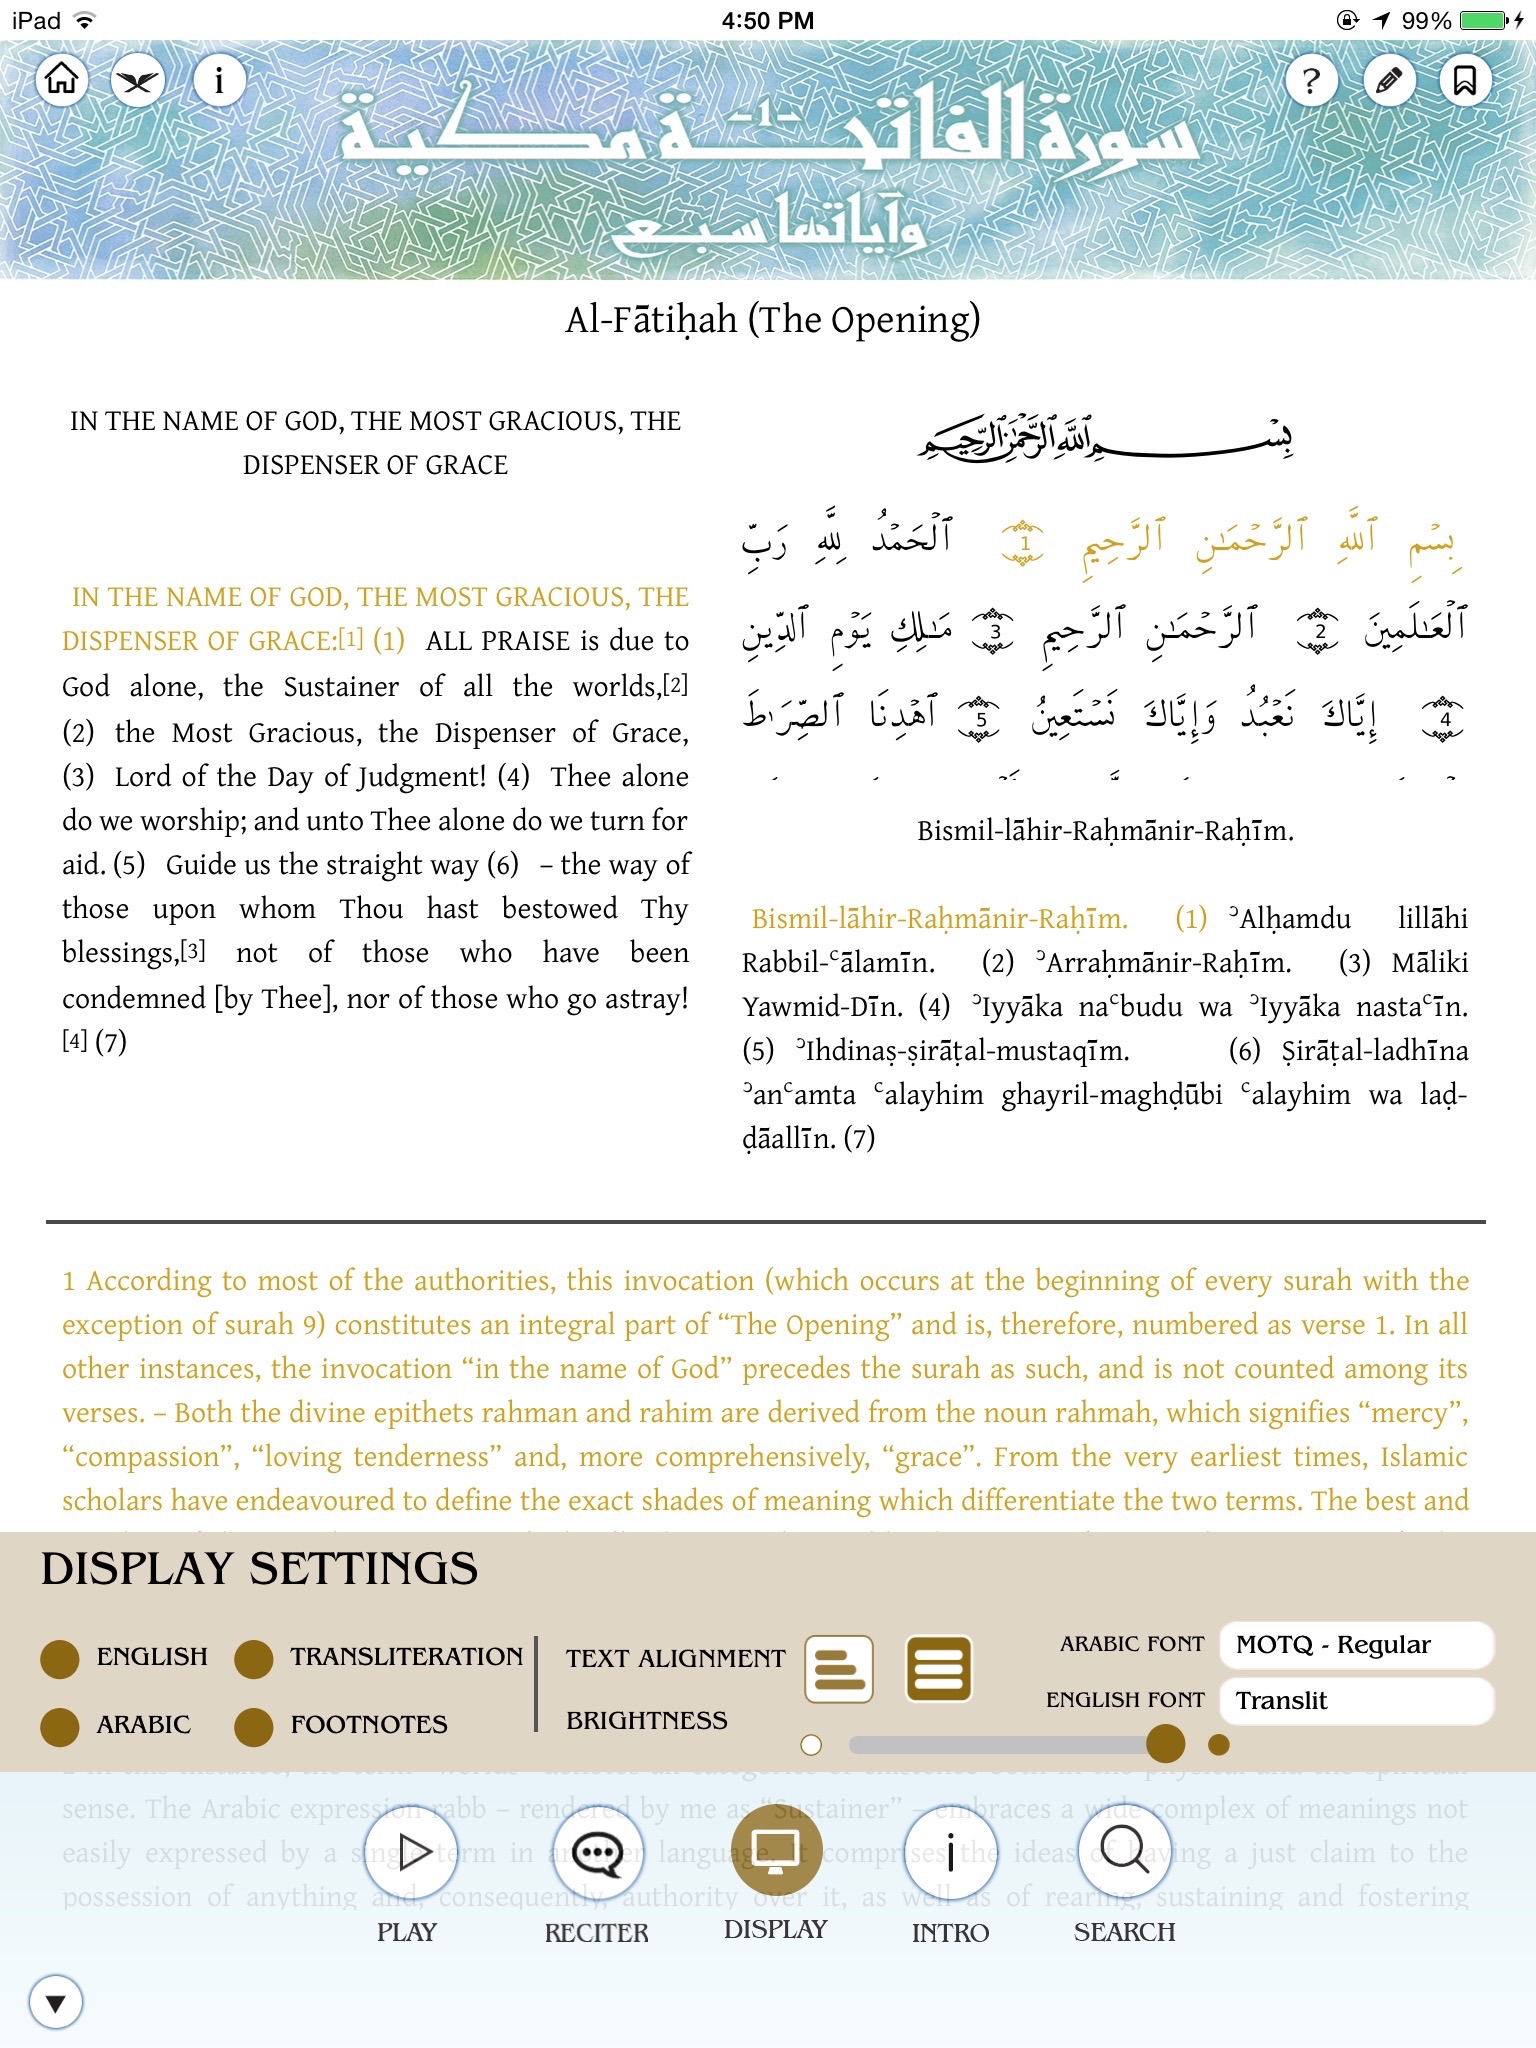 Message of the Quran Lite- Muhammad Asad's monumental translation and commentary screenshot 4